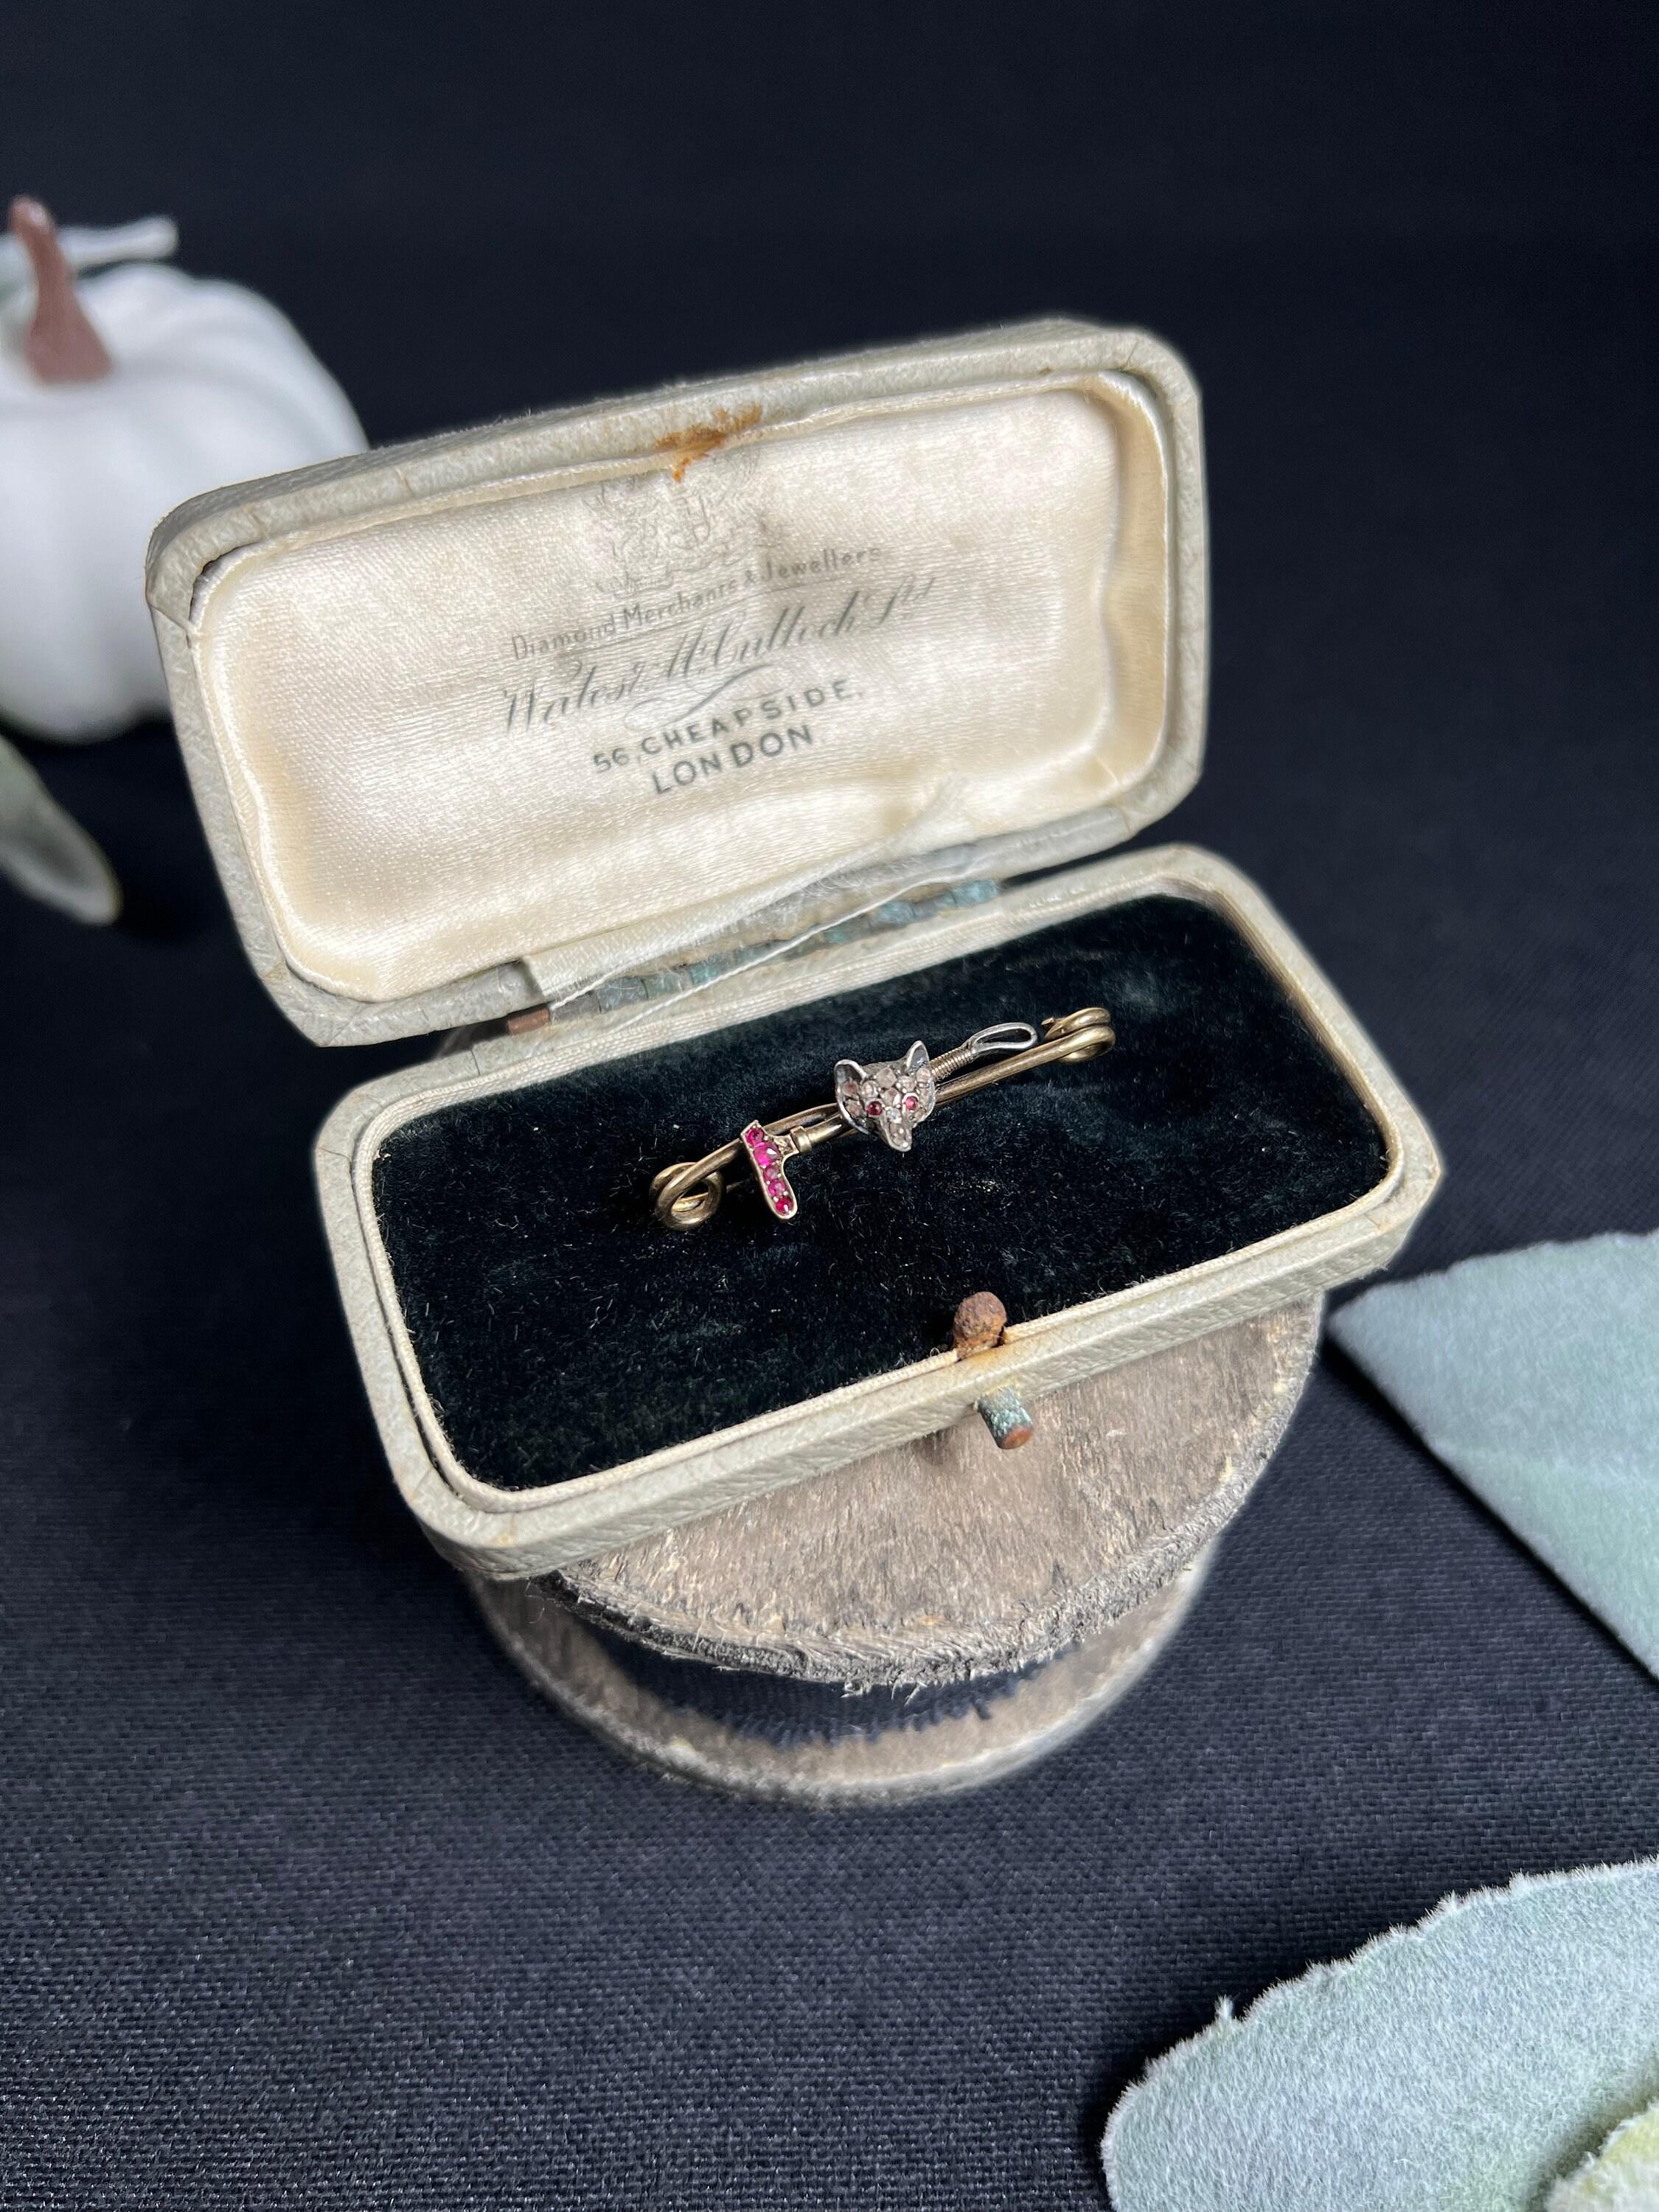 Antique Fox Head Stock Pin

15ct Gold Stamped

Victorian Circa 1880

This exquisite 15ct gold Victorian stock pin brooch is a true masterpiece. The brooch features a stunning fox head mounted on a ruby-handled riding crop with a rose-cut,